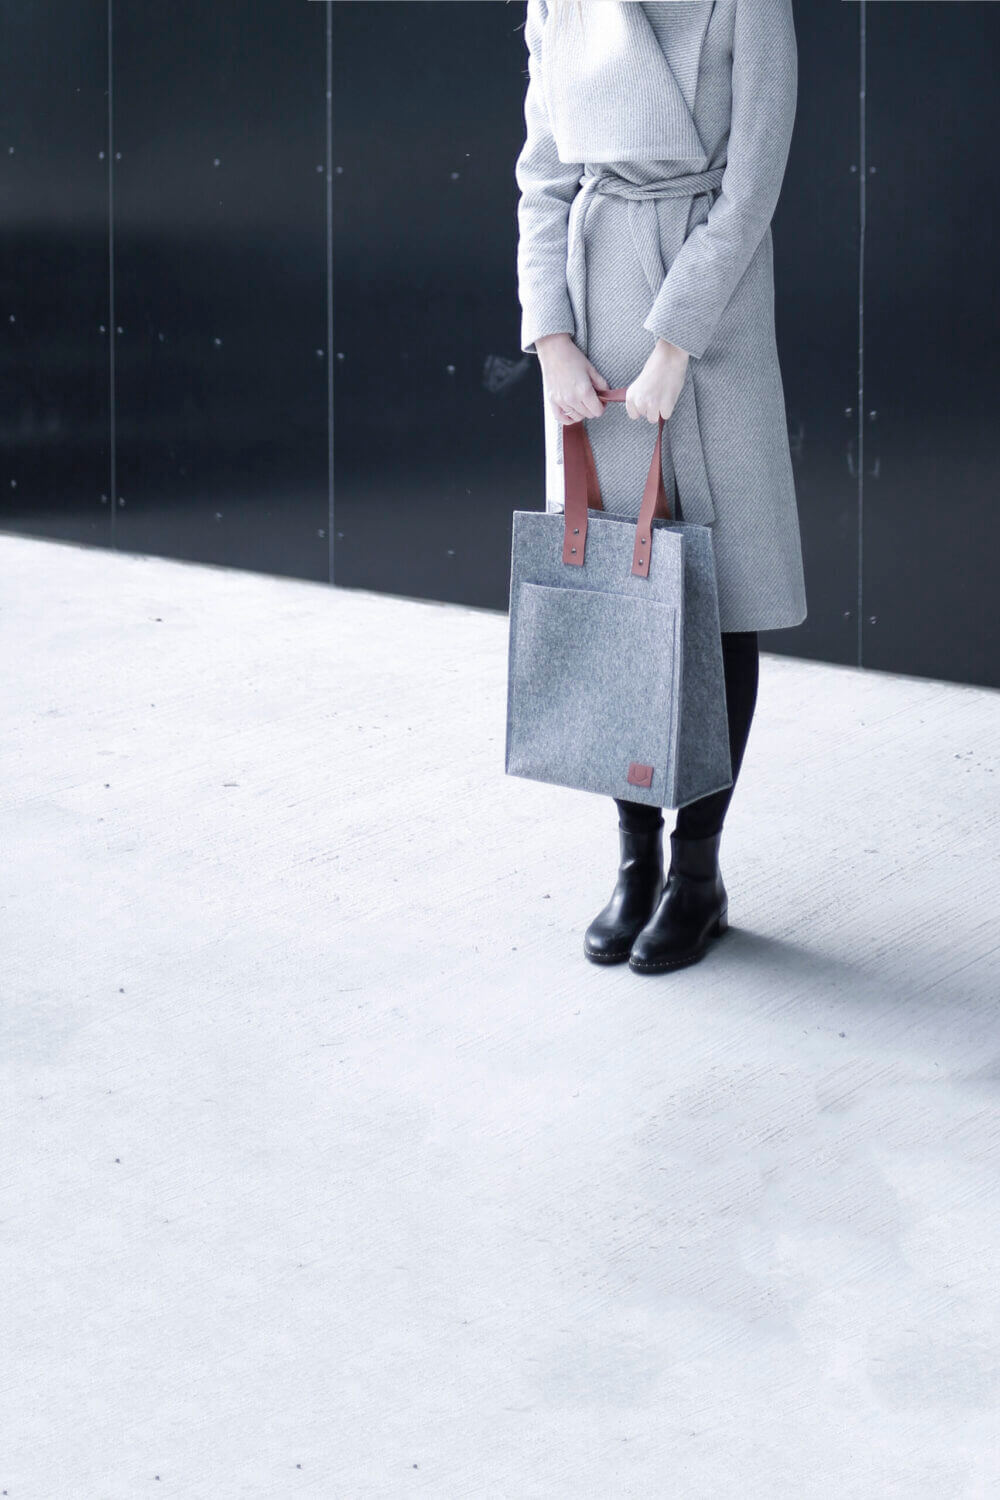 a woman in a gray coat holding a gray bag.